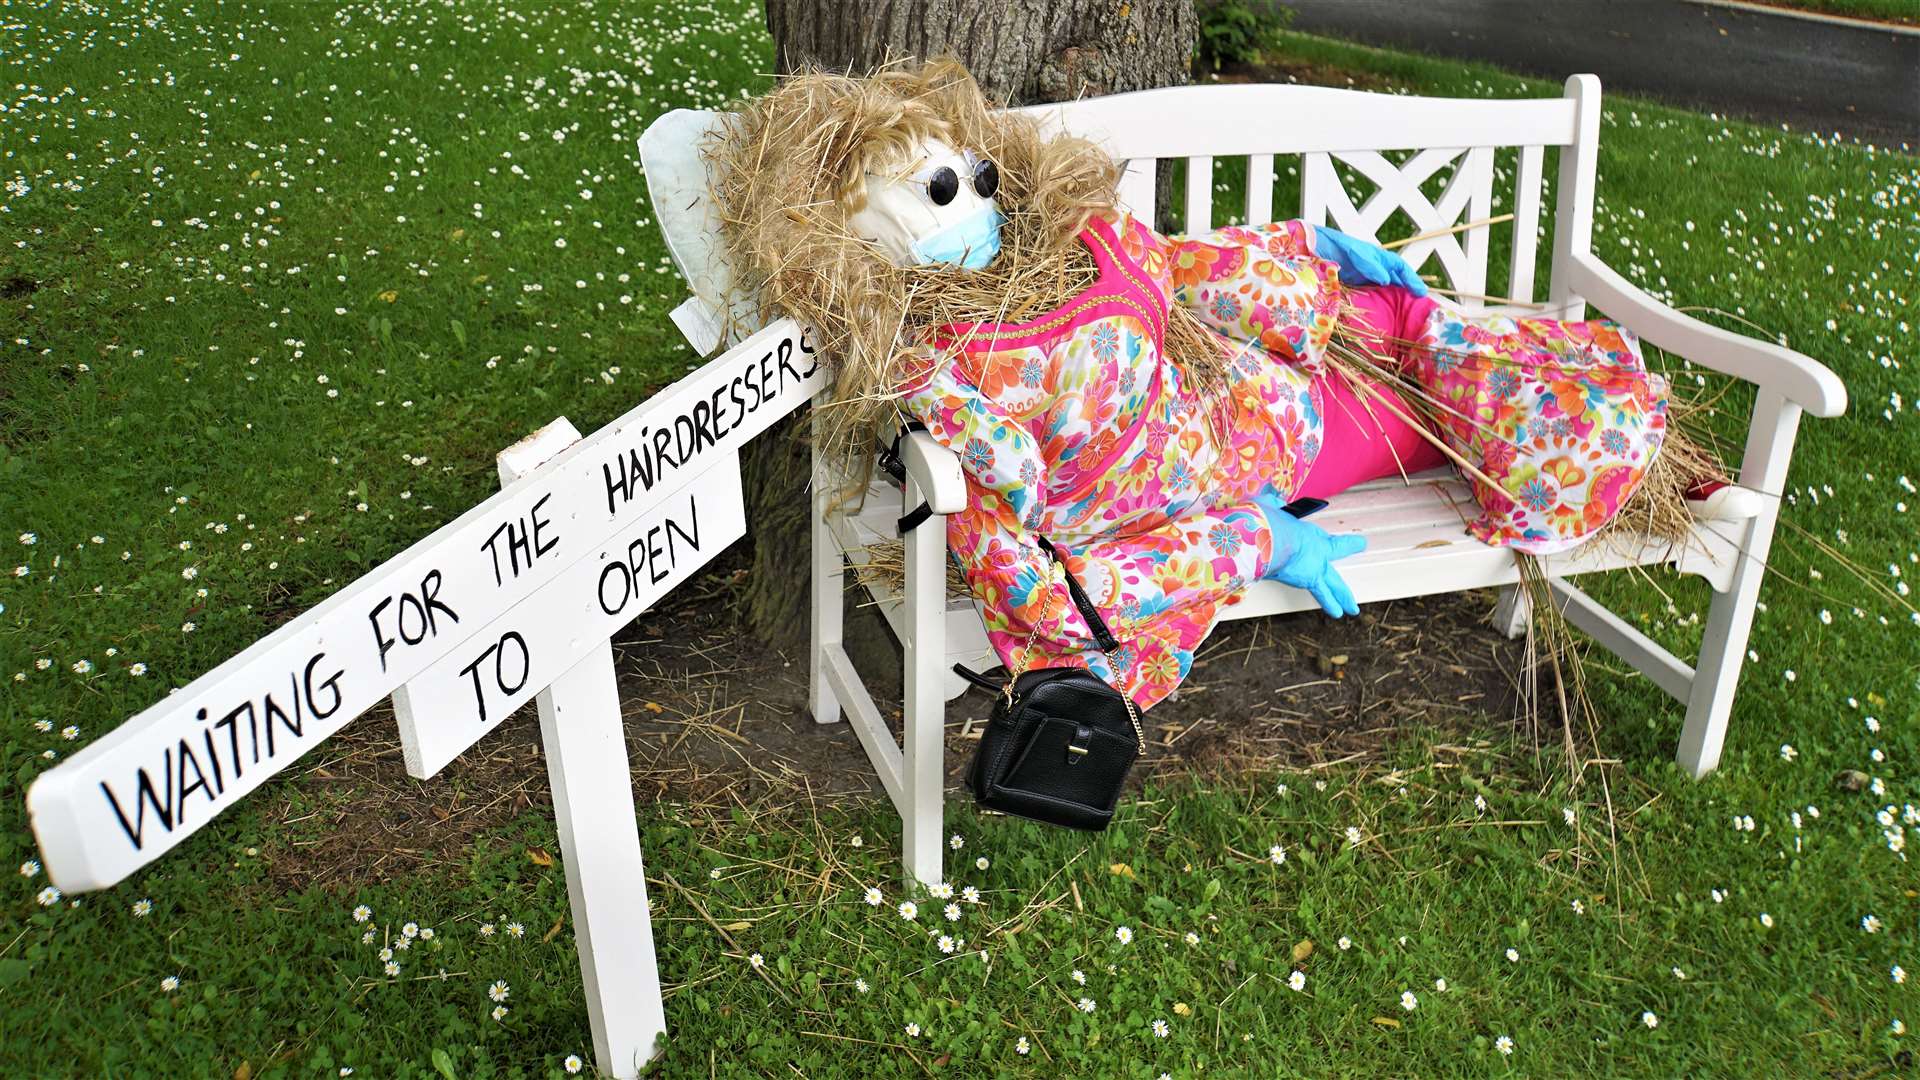 Waiting patiently for the hairdressers to open is this Wick Gala scarecrow entry from 2020, made by Jennifer Cowie.